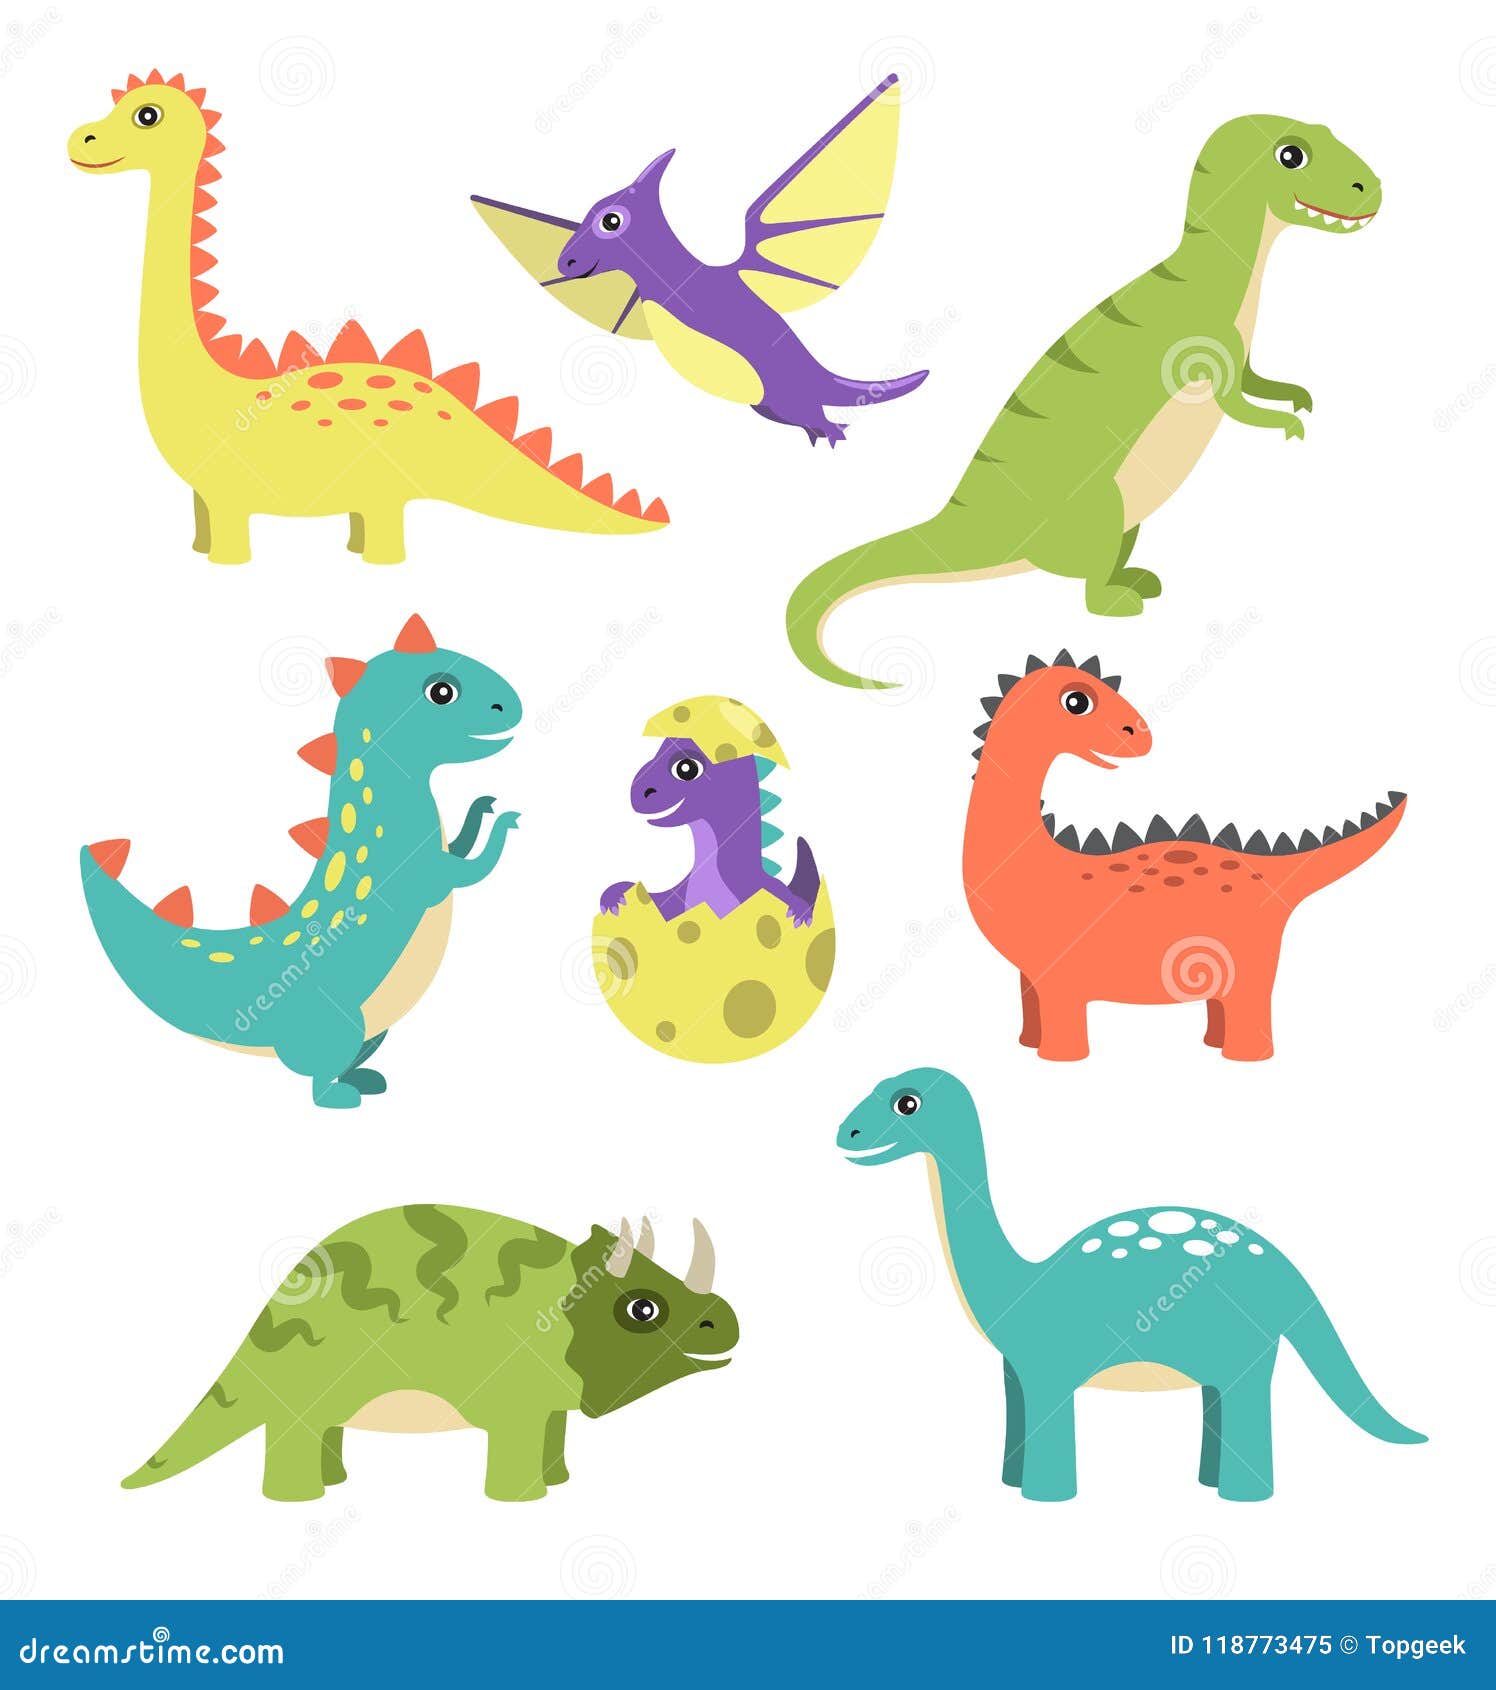 Creatures Types Of Dinosaurs Vector Illustration Stock Vector ...